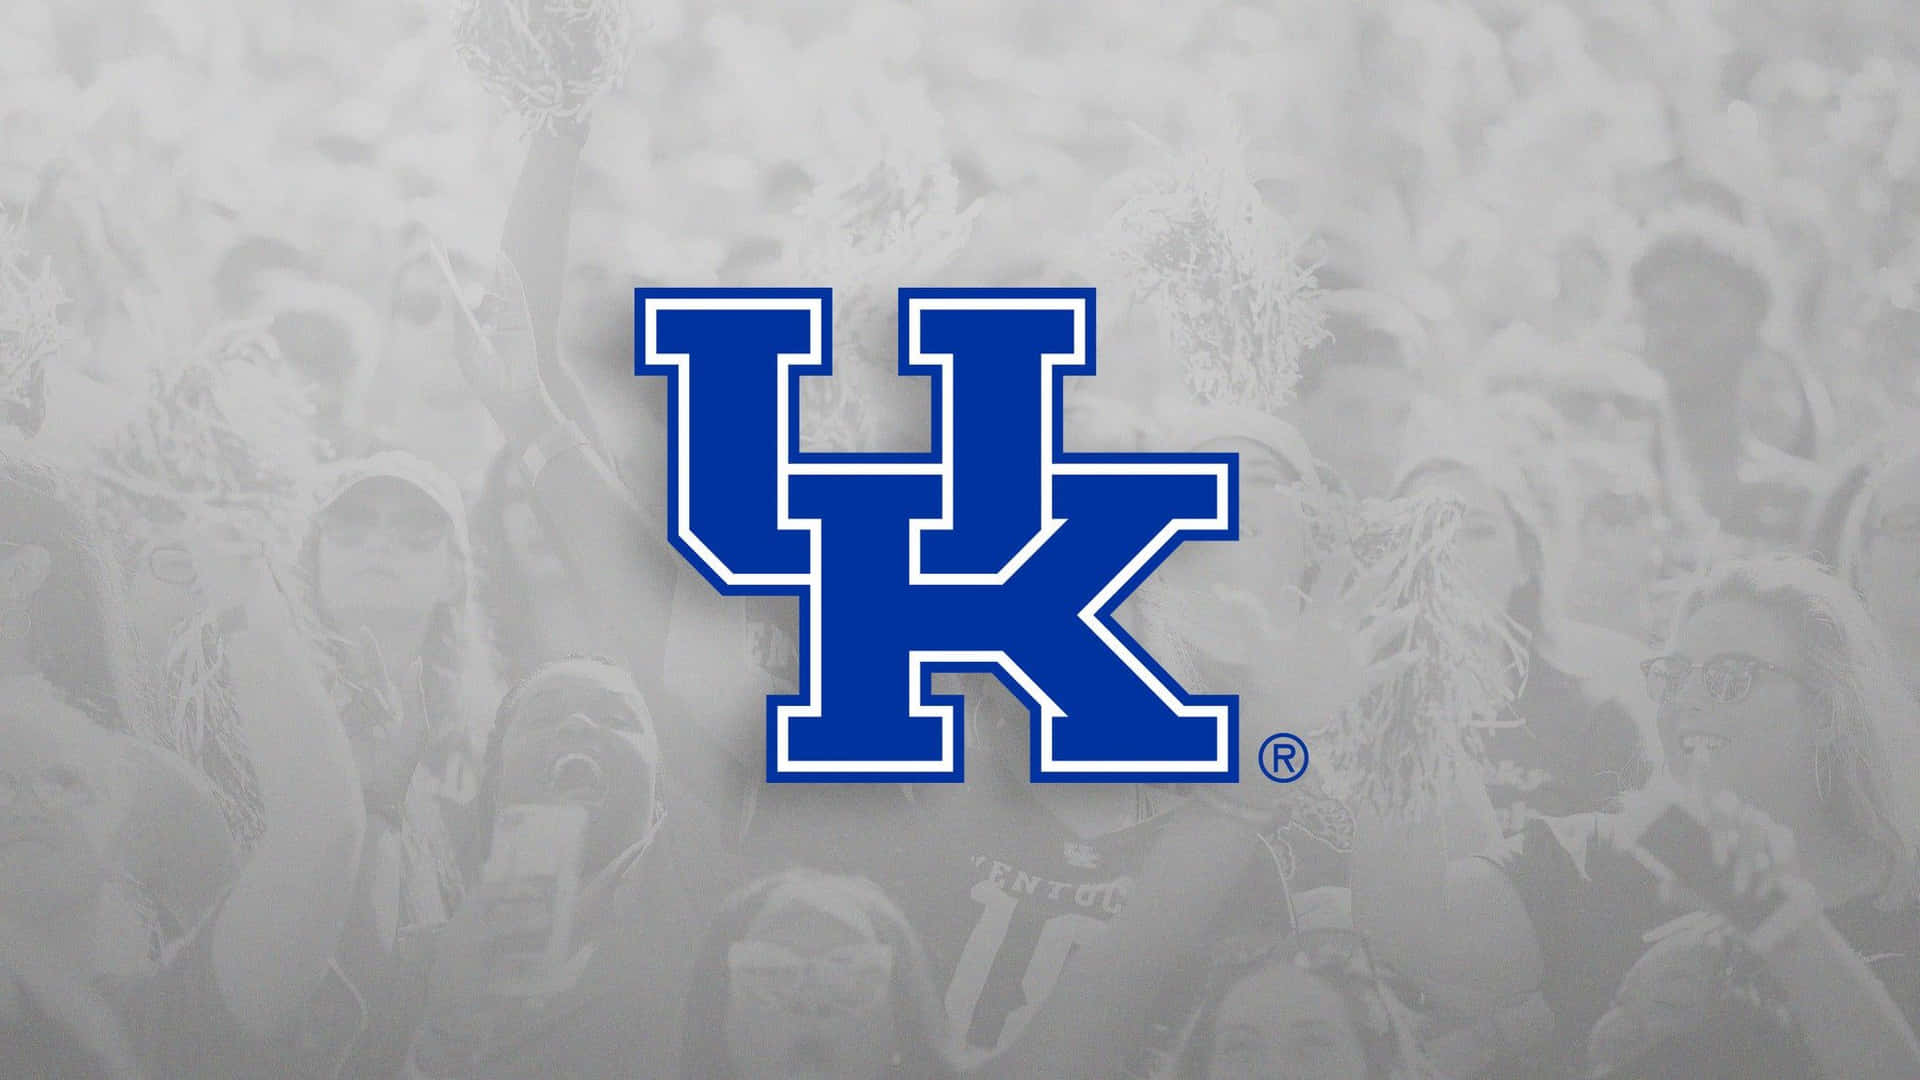 The University of Kentucky Wildcats take the field in an iconic rivalry game. Wallpaper